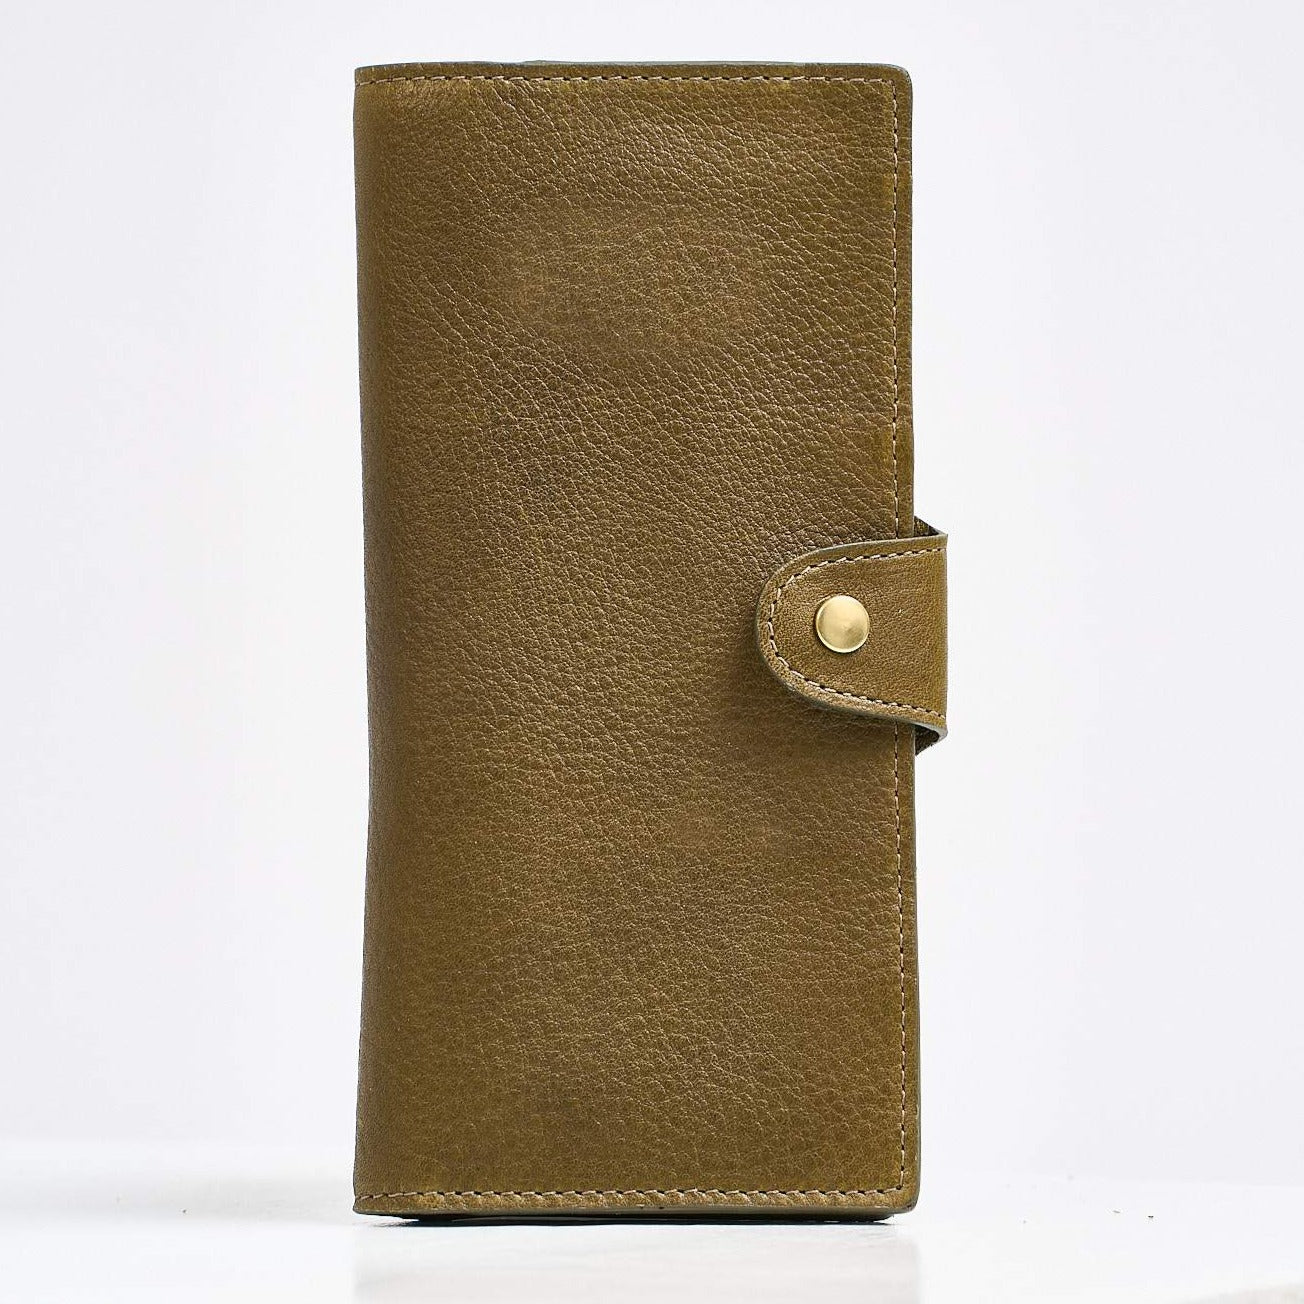 Snap Wallet - Moss Green | Leather Wallet | Lund Leather